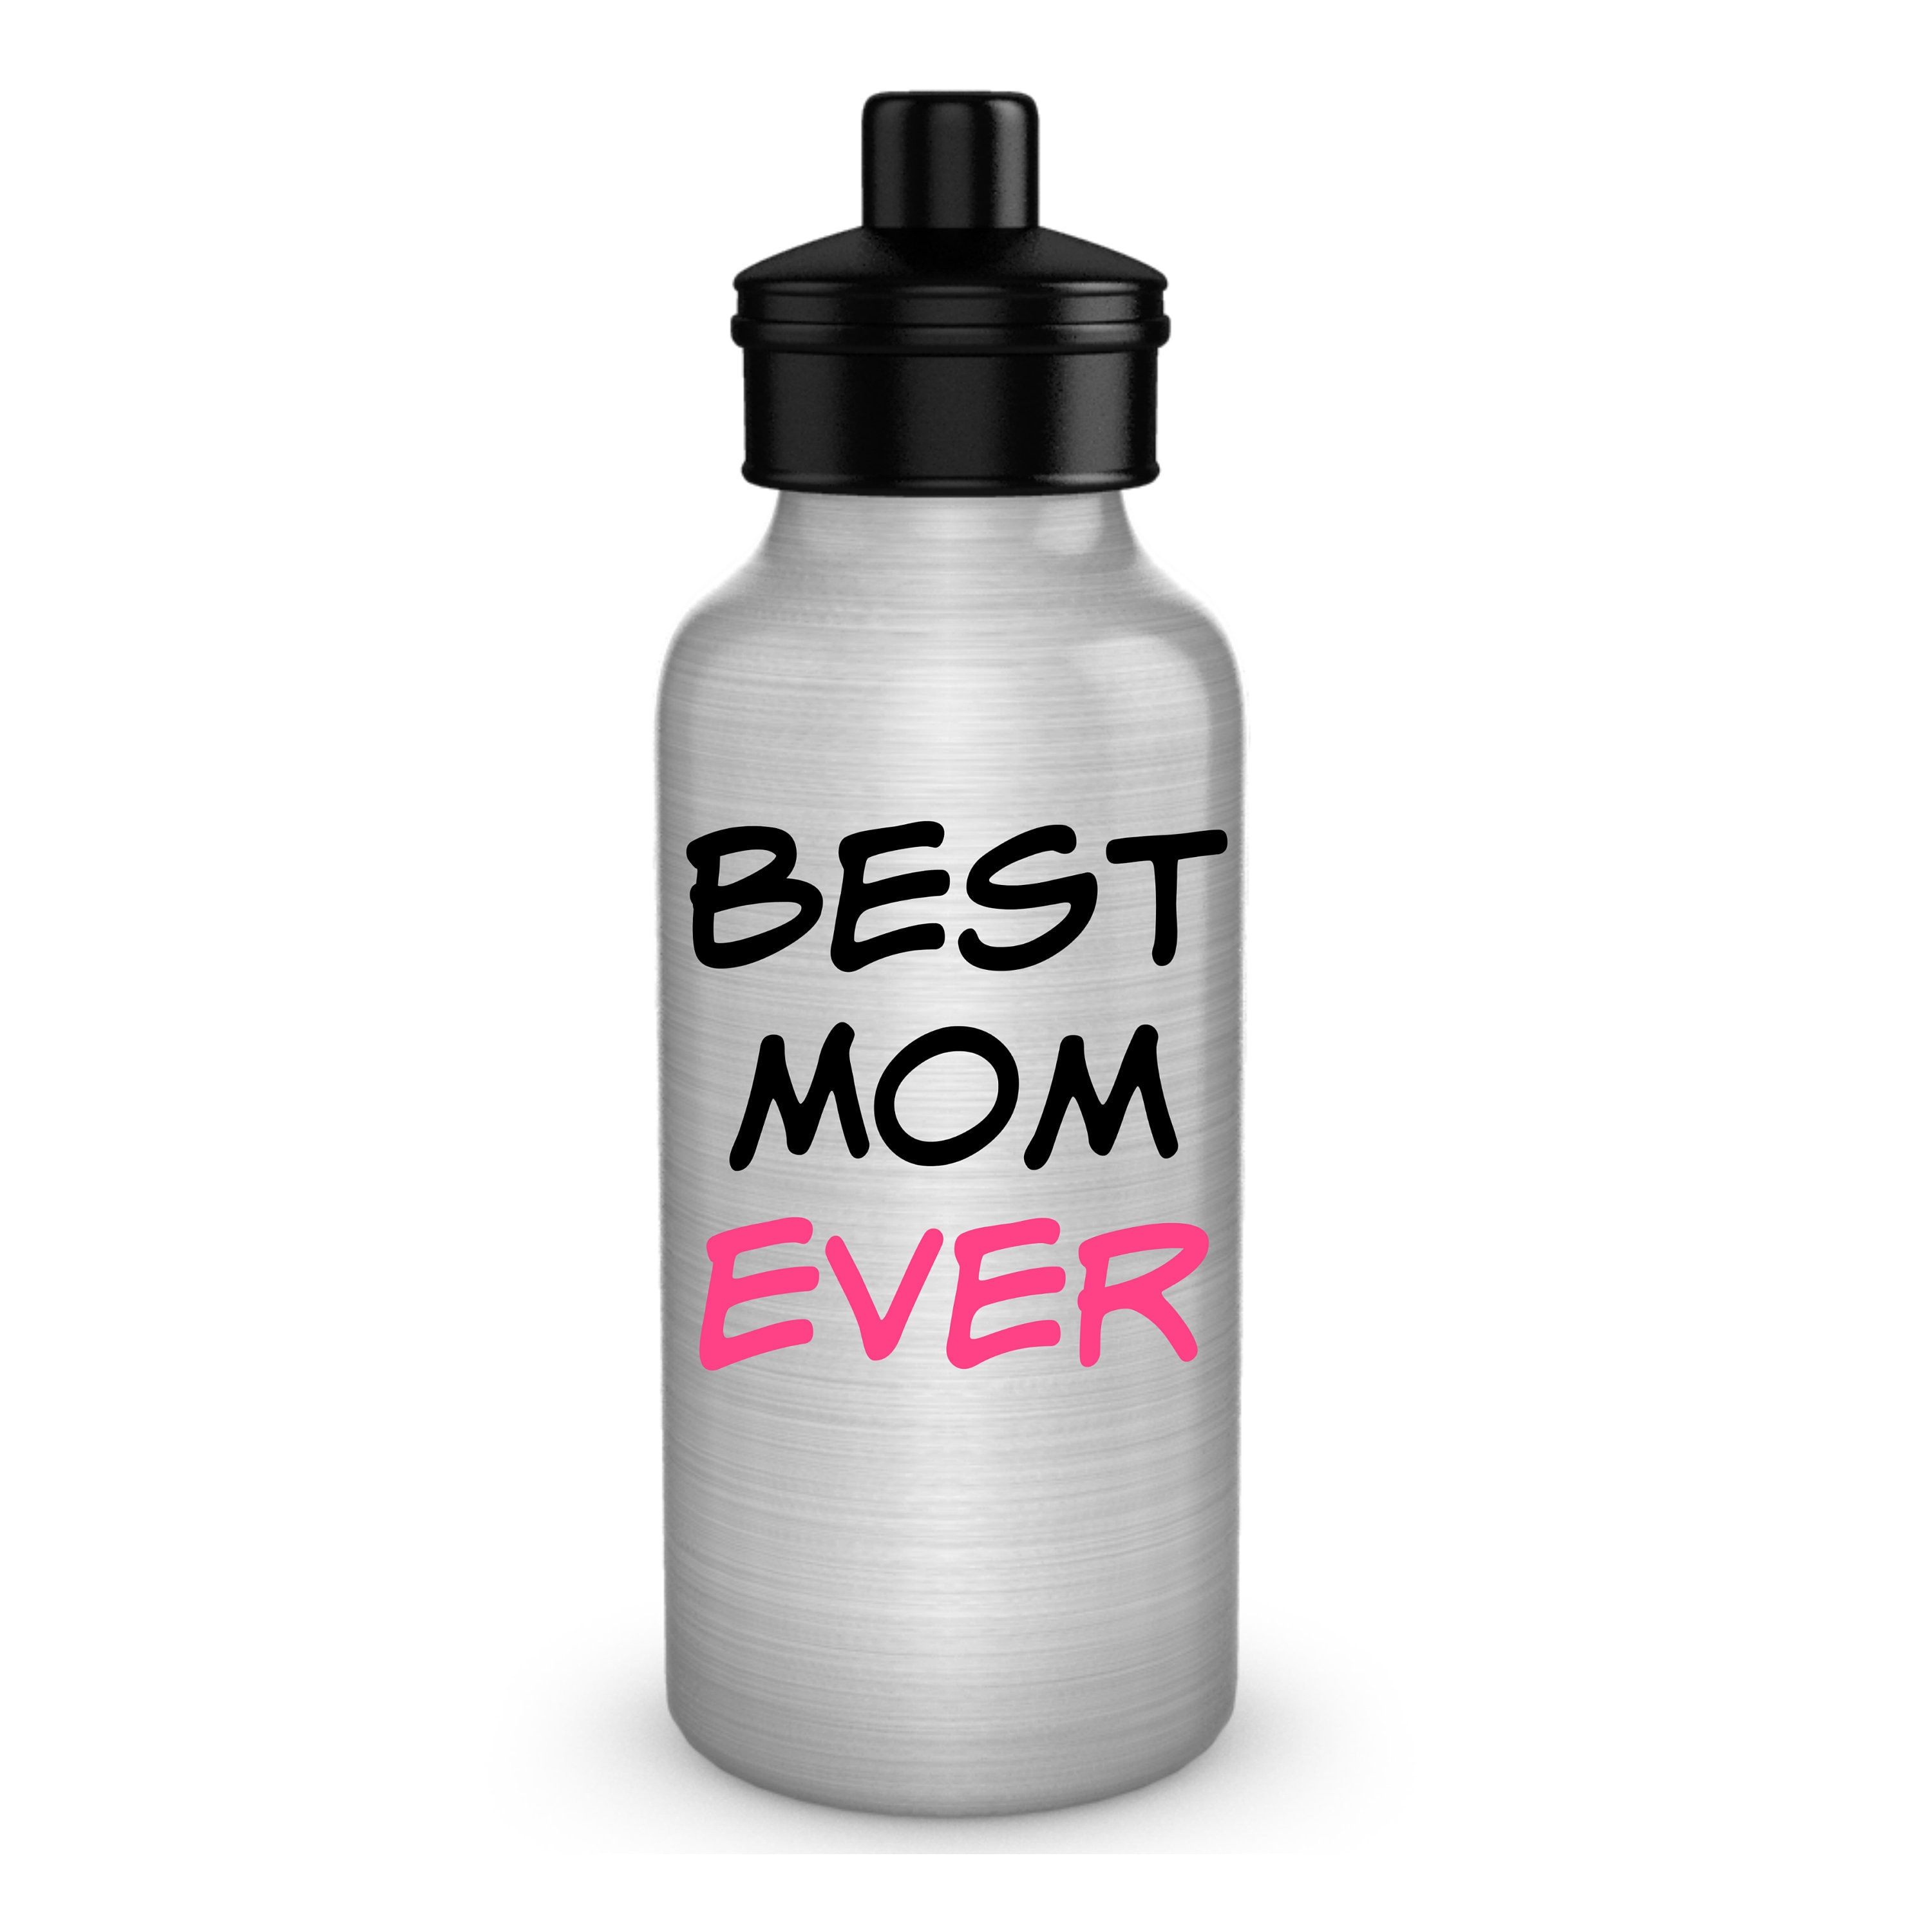 Best Mom Ever Water Bottle with black and pink text. | Etsy